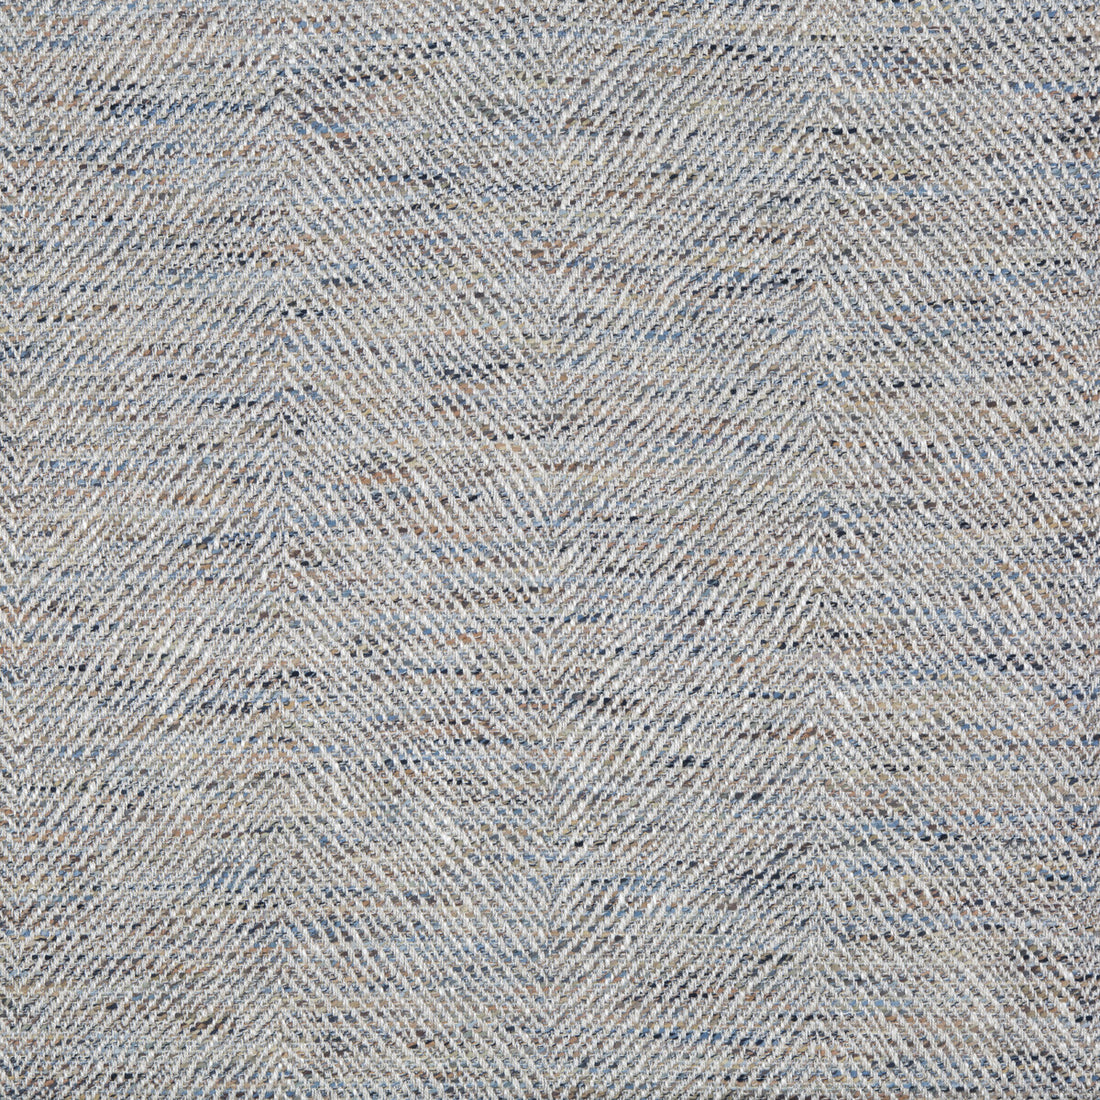 Sarada Texture fabric in blue/tan color - pattern 8015176.524.0 - by Brunschwig &amp; Fils in the Cape Comorin collection